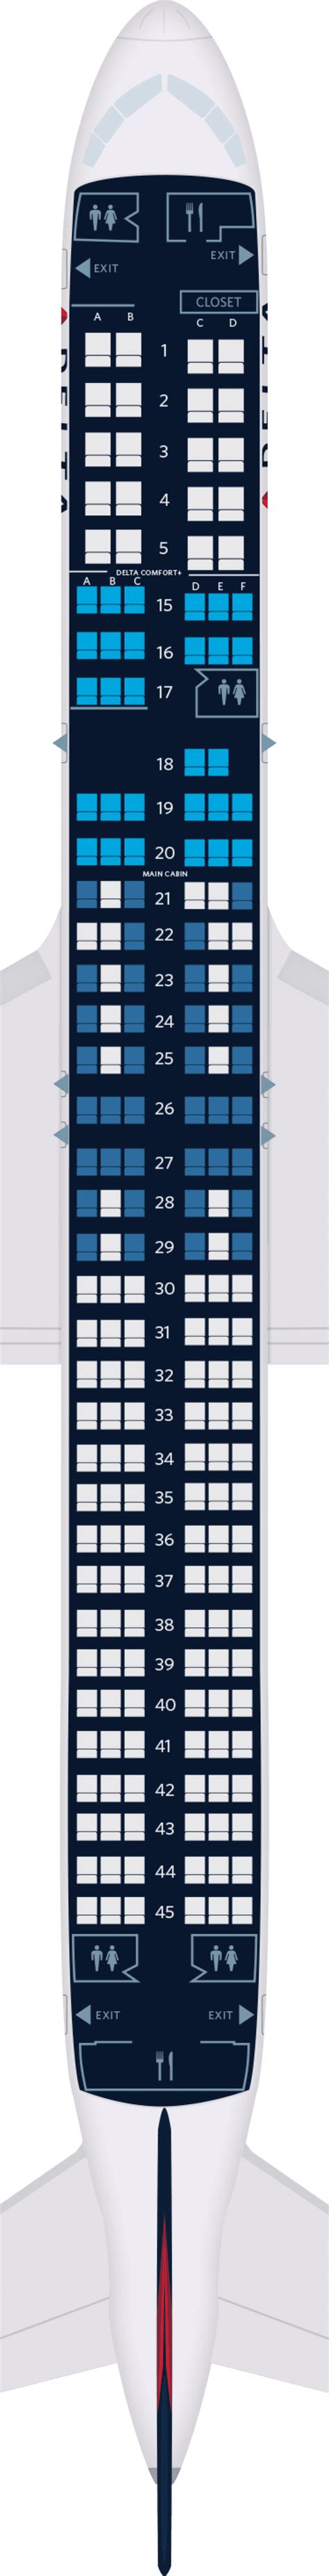 boeing 757 jet seating chart